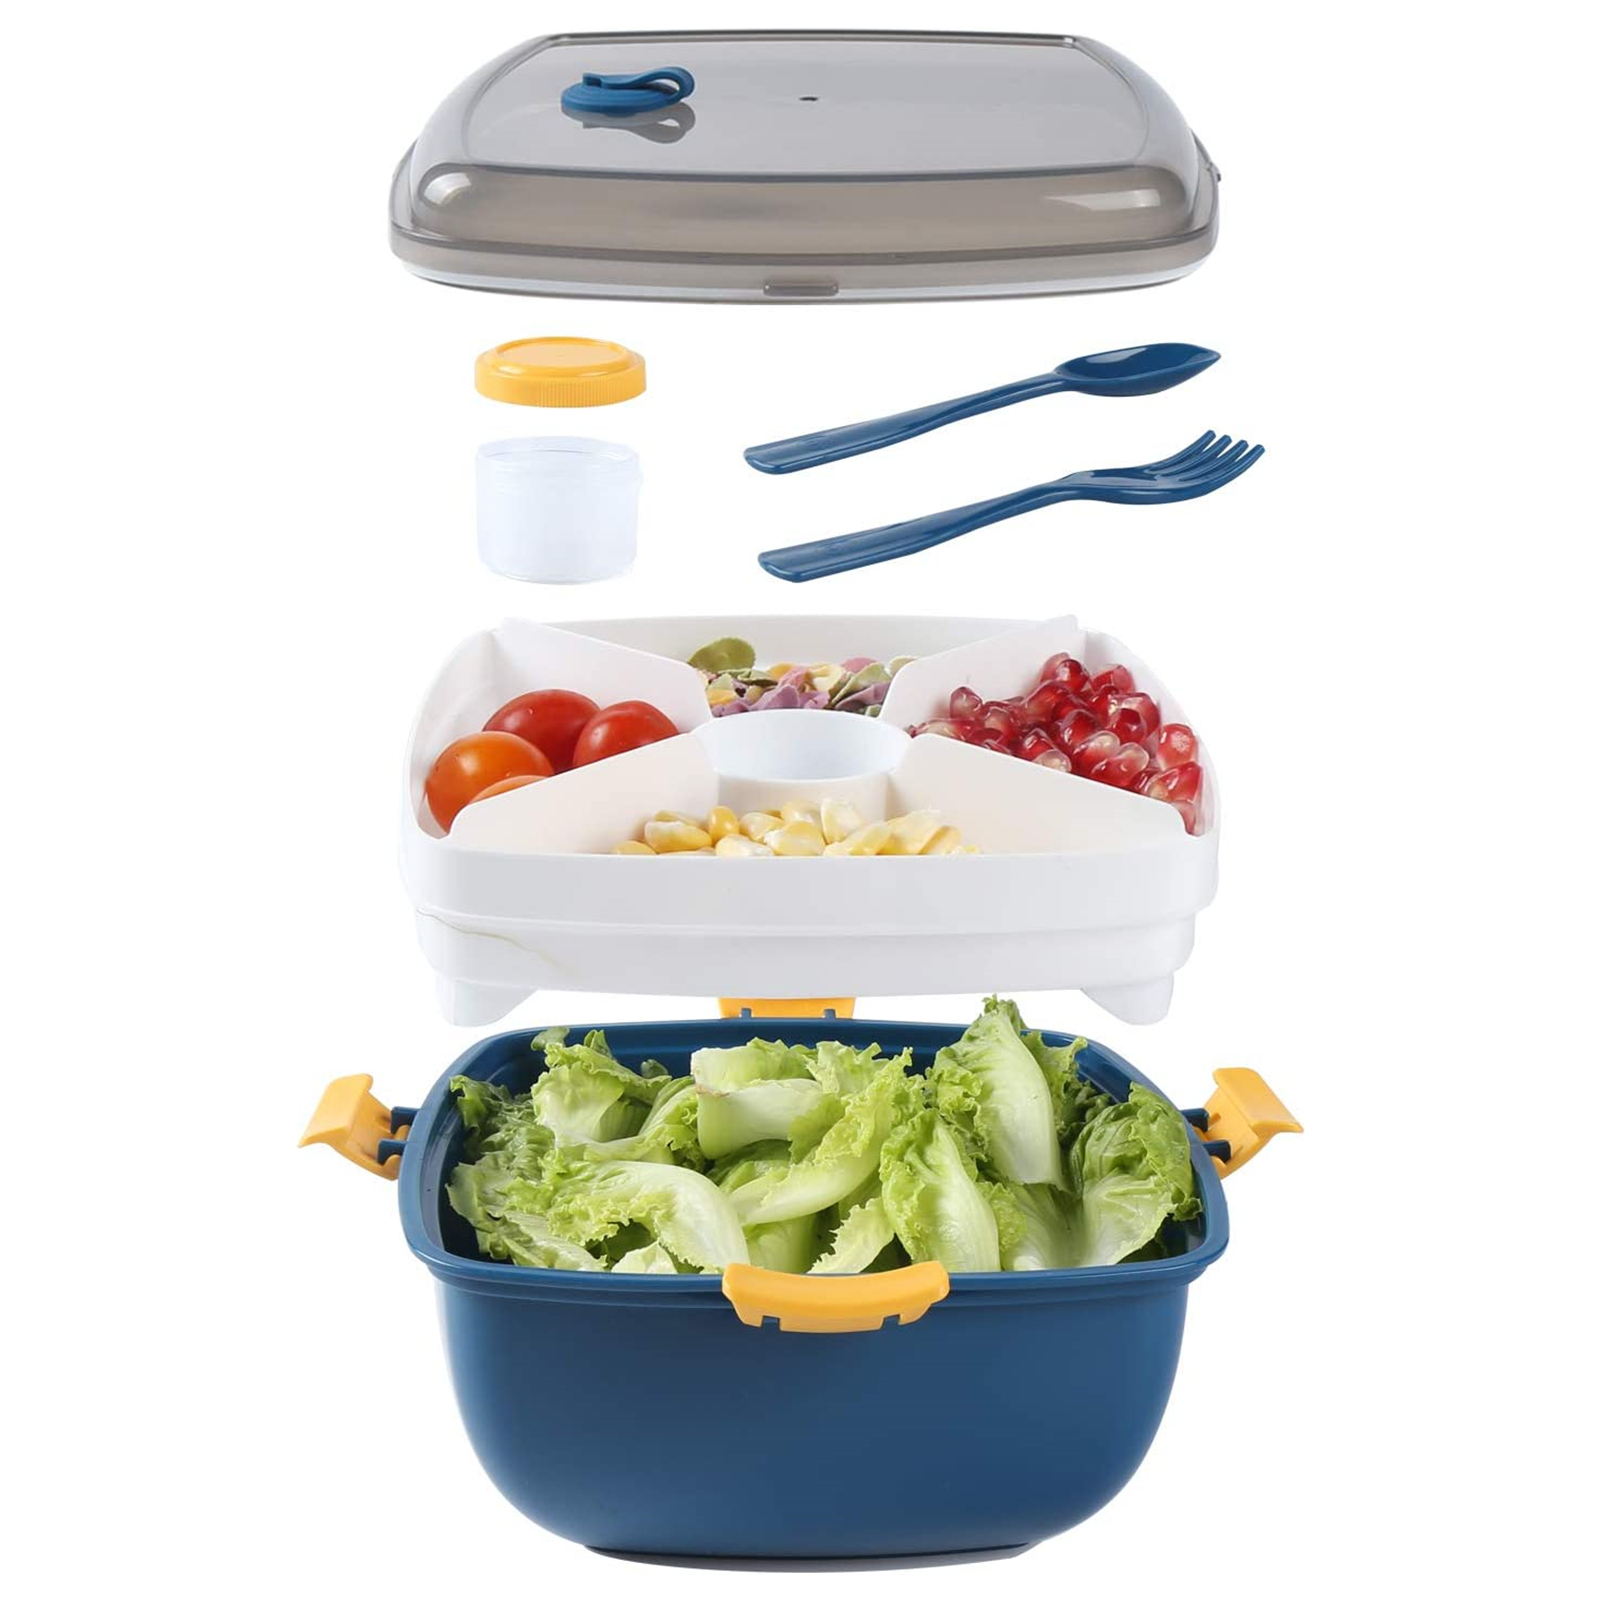 Large 52-oz. Salad Lunch Container, Salad Bowl with 3-Compartments